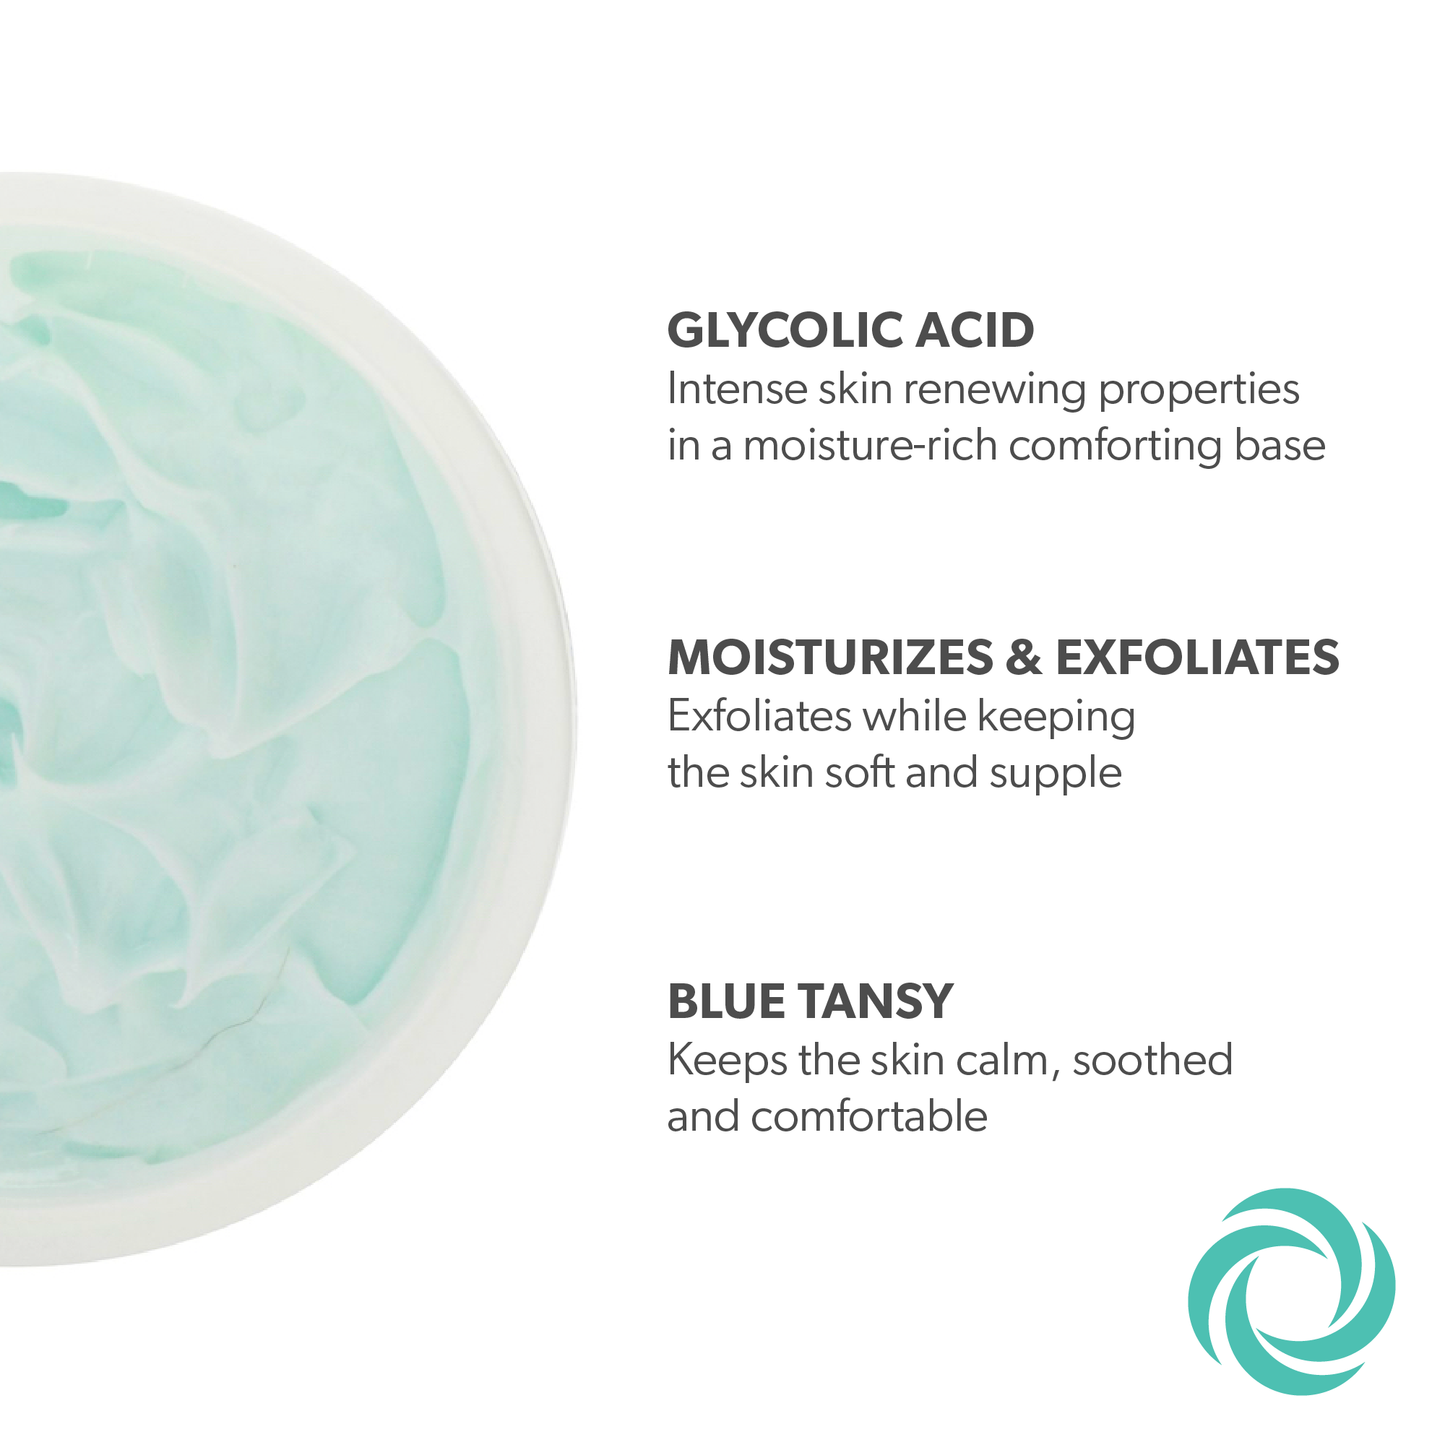 Ingredients in the glycolic acid skincare line by Serious Skincare